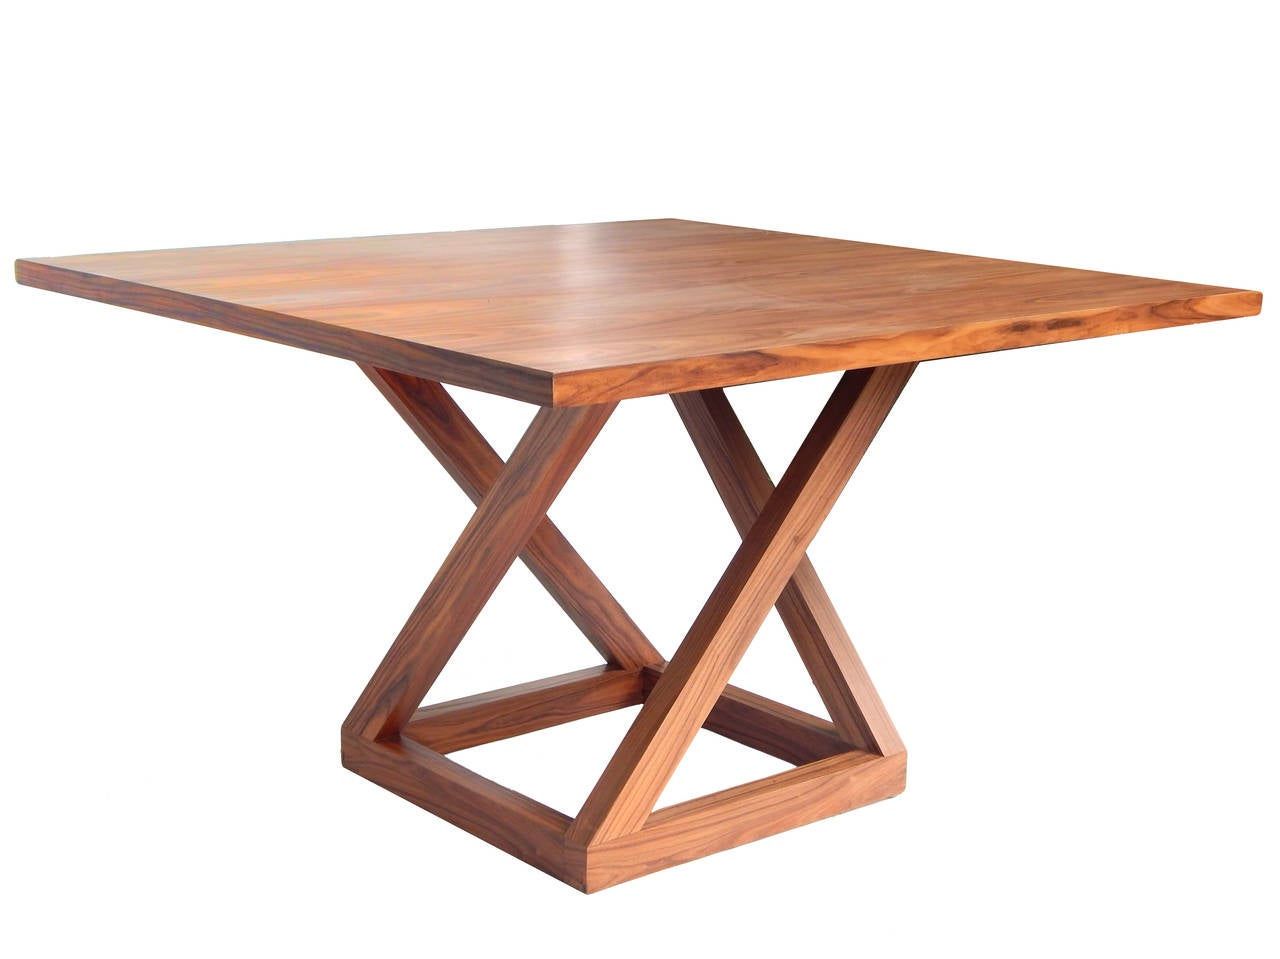 Modern Circassian Walnut Dining Table In Excellent Condition For Sale In Bridgehampton, NY